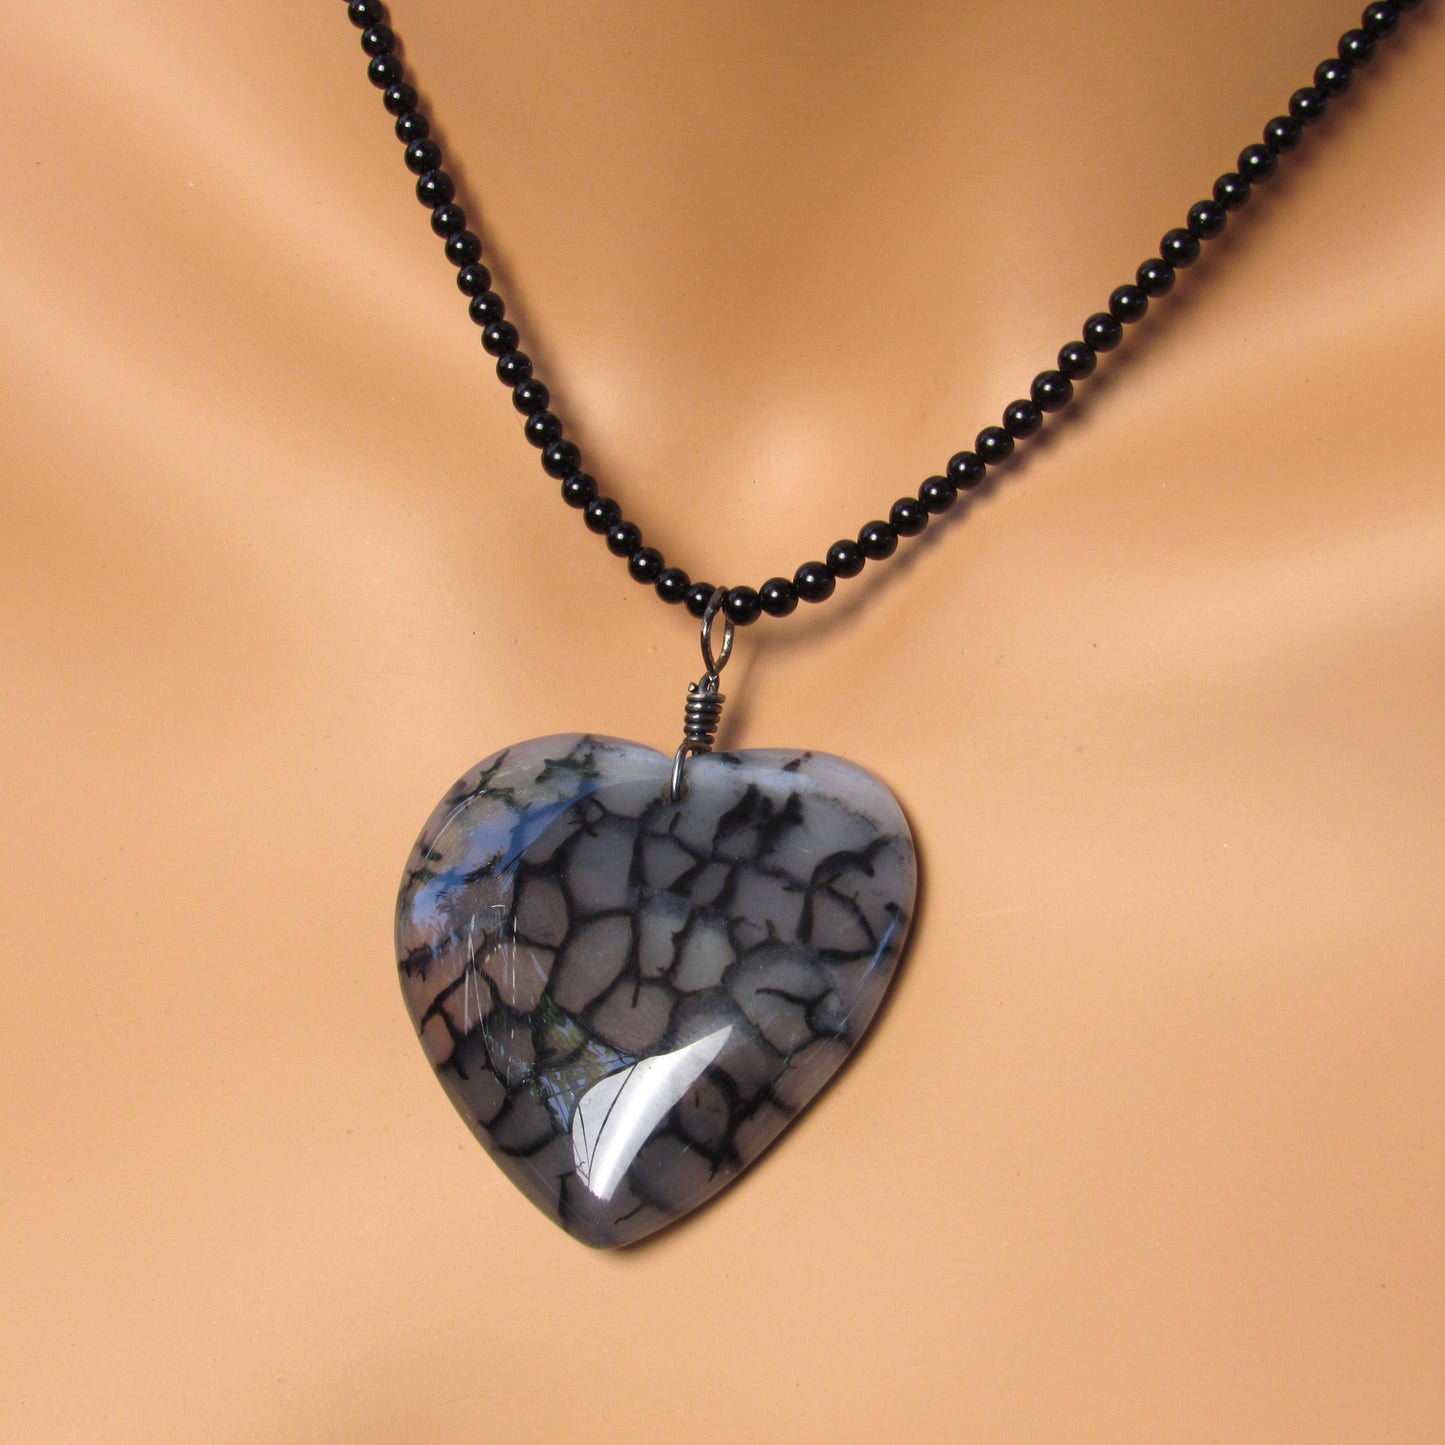 Hand Wrapped Dragon’s Vein Agate Heart on Onyx necklace with Oxidized Sterling Clasp